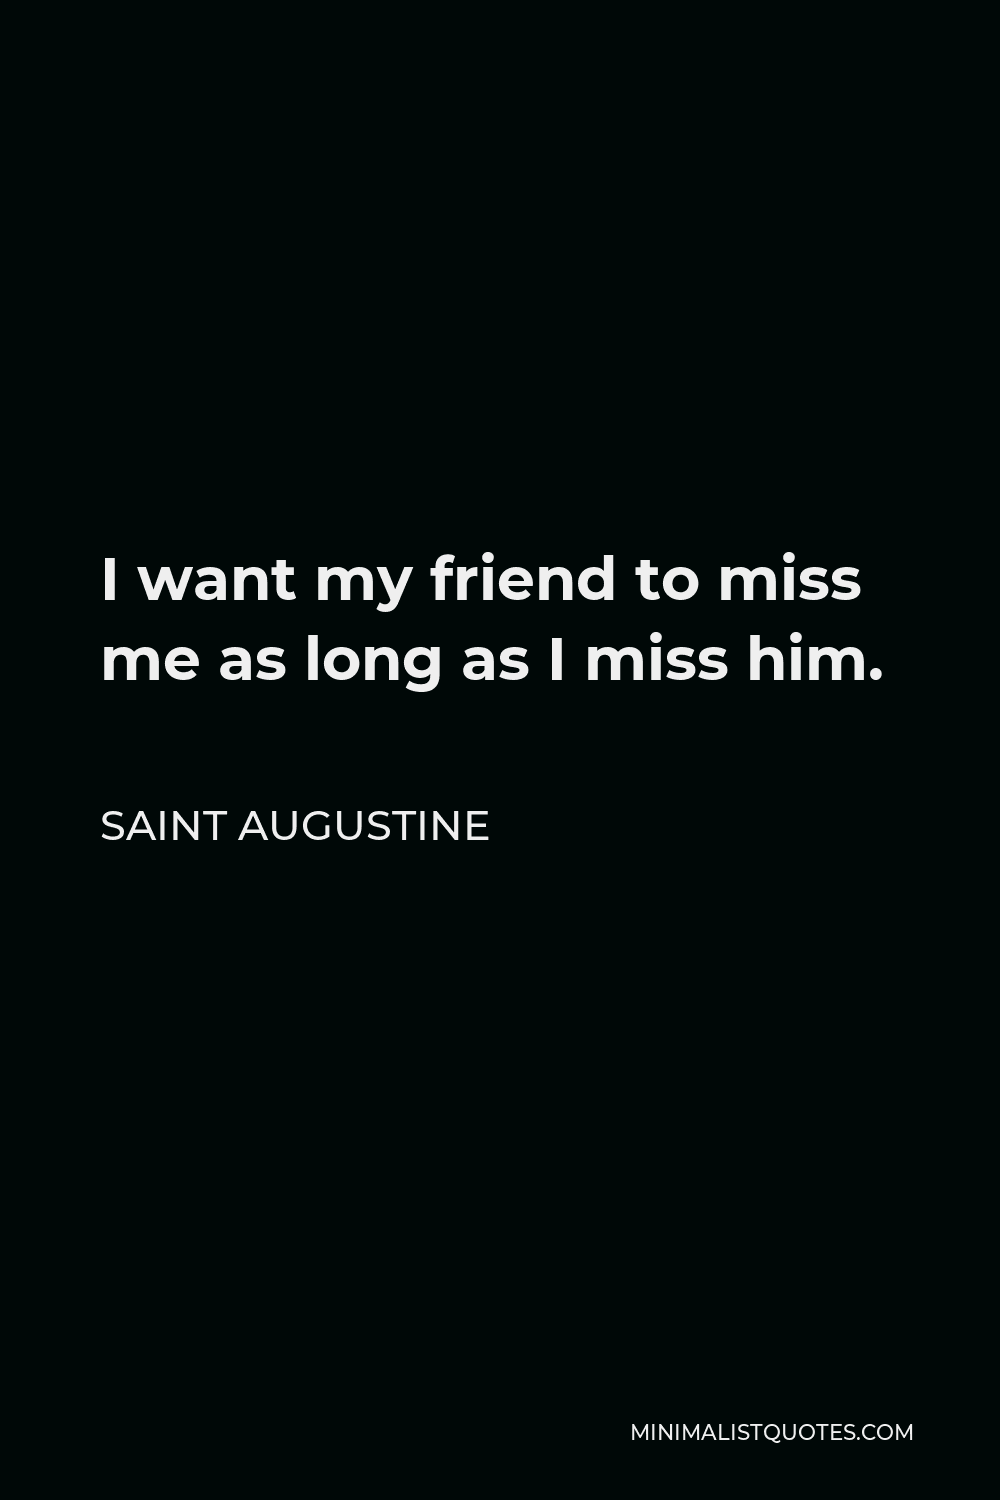 Saint Augustine Quote - I want my friend to miss me as long as I miss him.